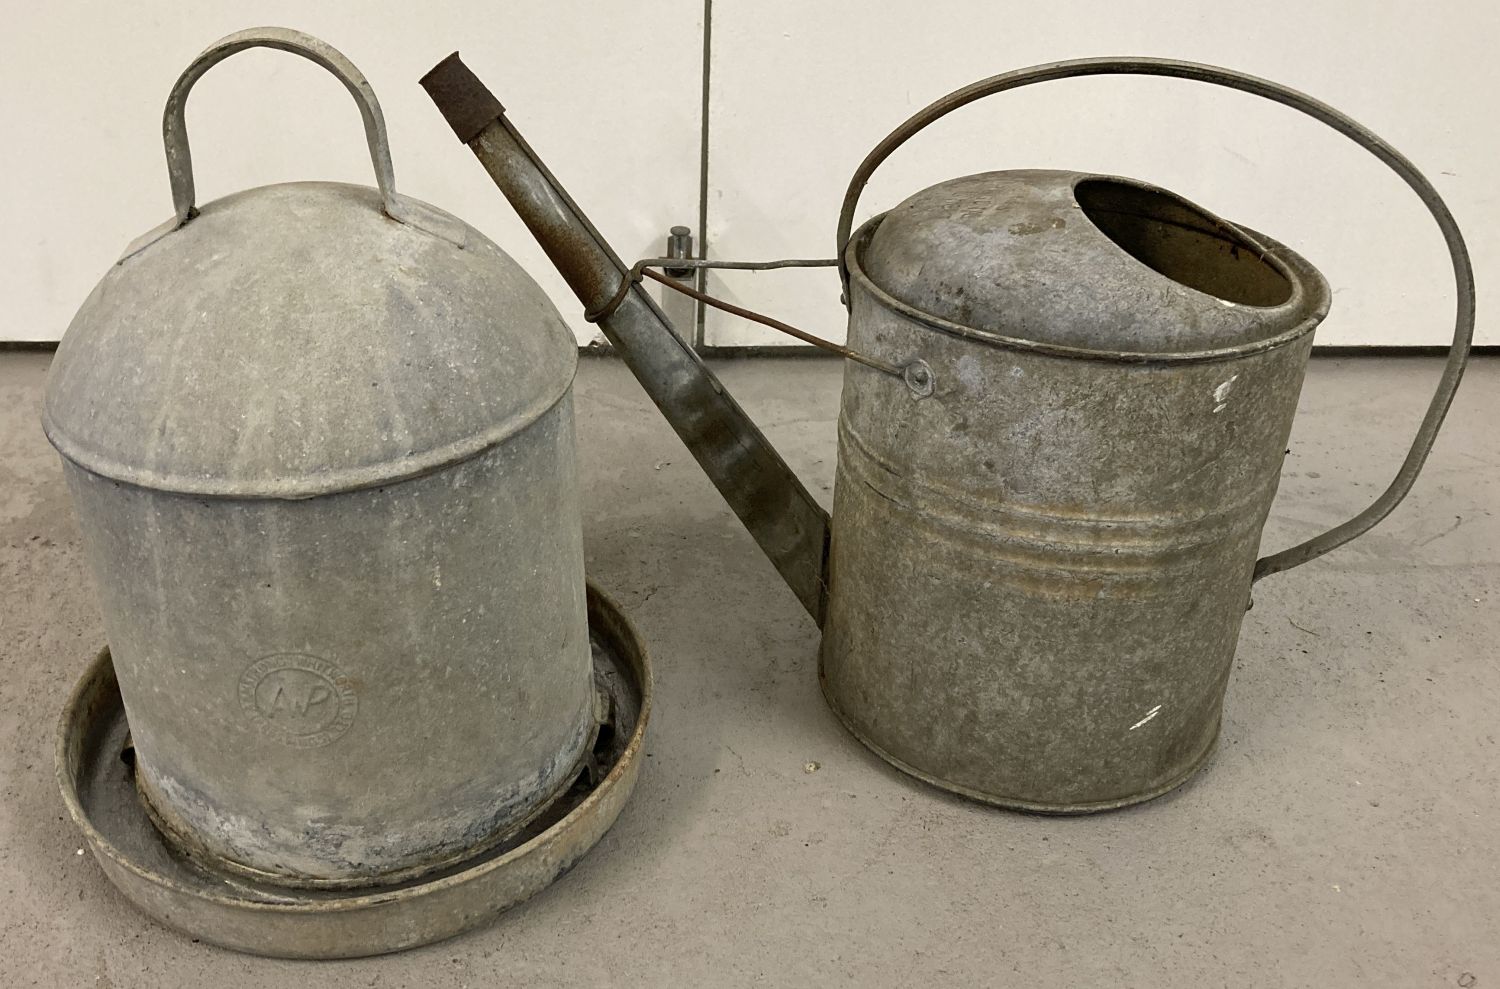 A vintage galvanised metal watering can together with a galvanised metal dome topped drinker.